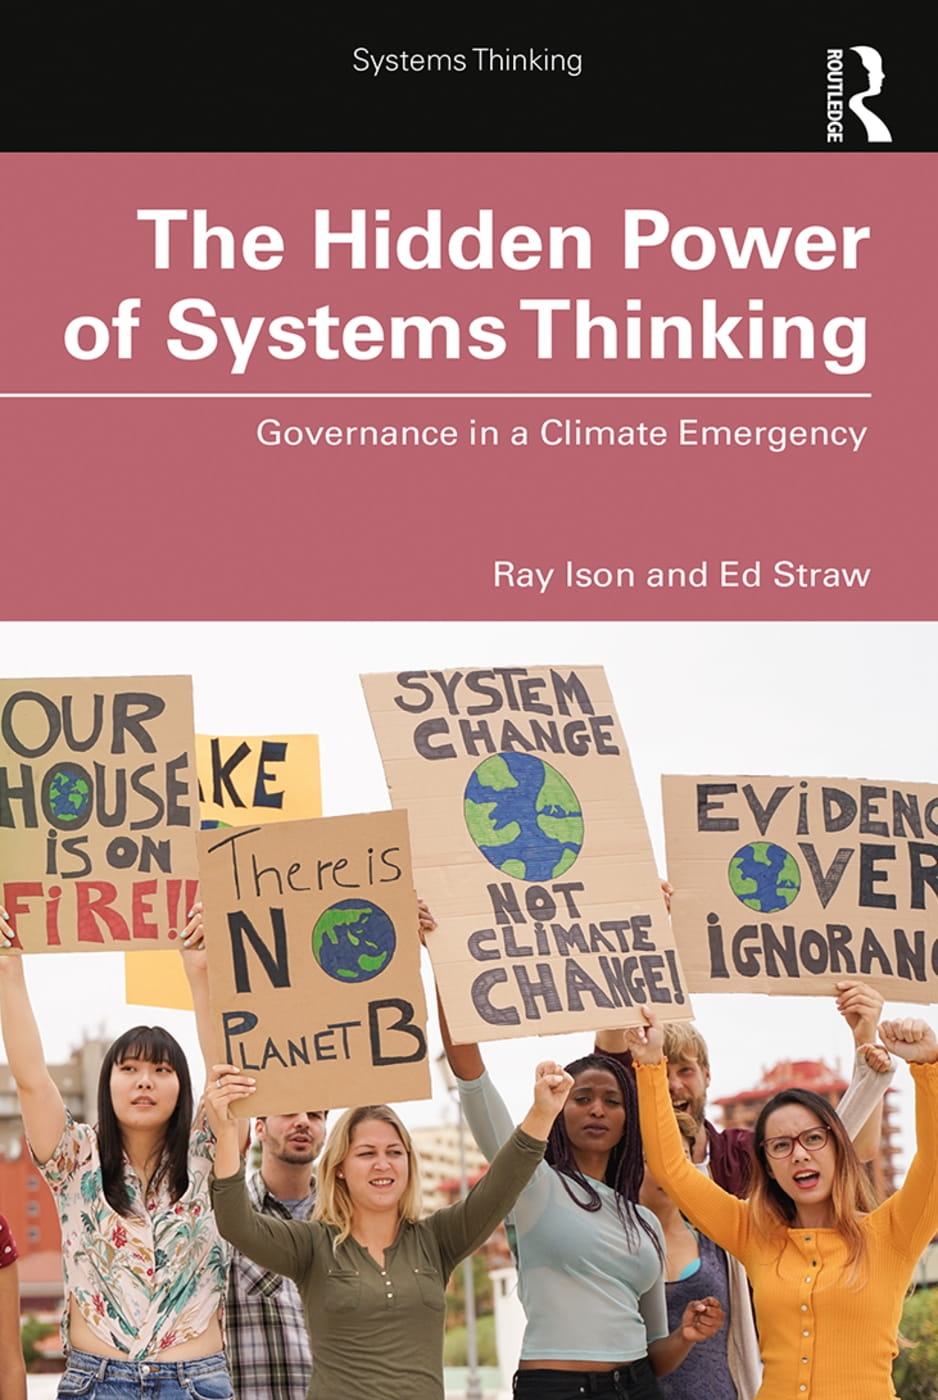 The Hidden Power of Systems Thinking: Governance in a Climate Emergency